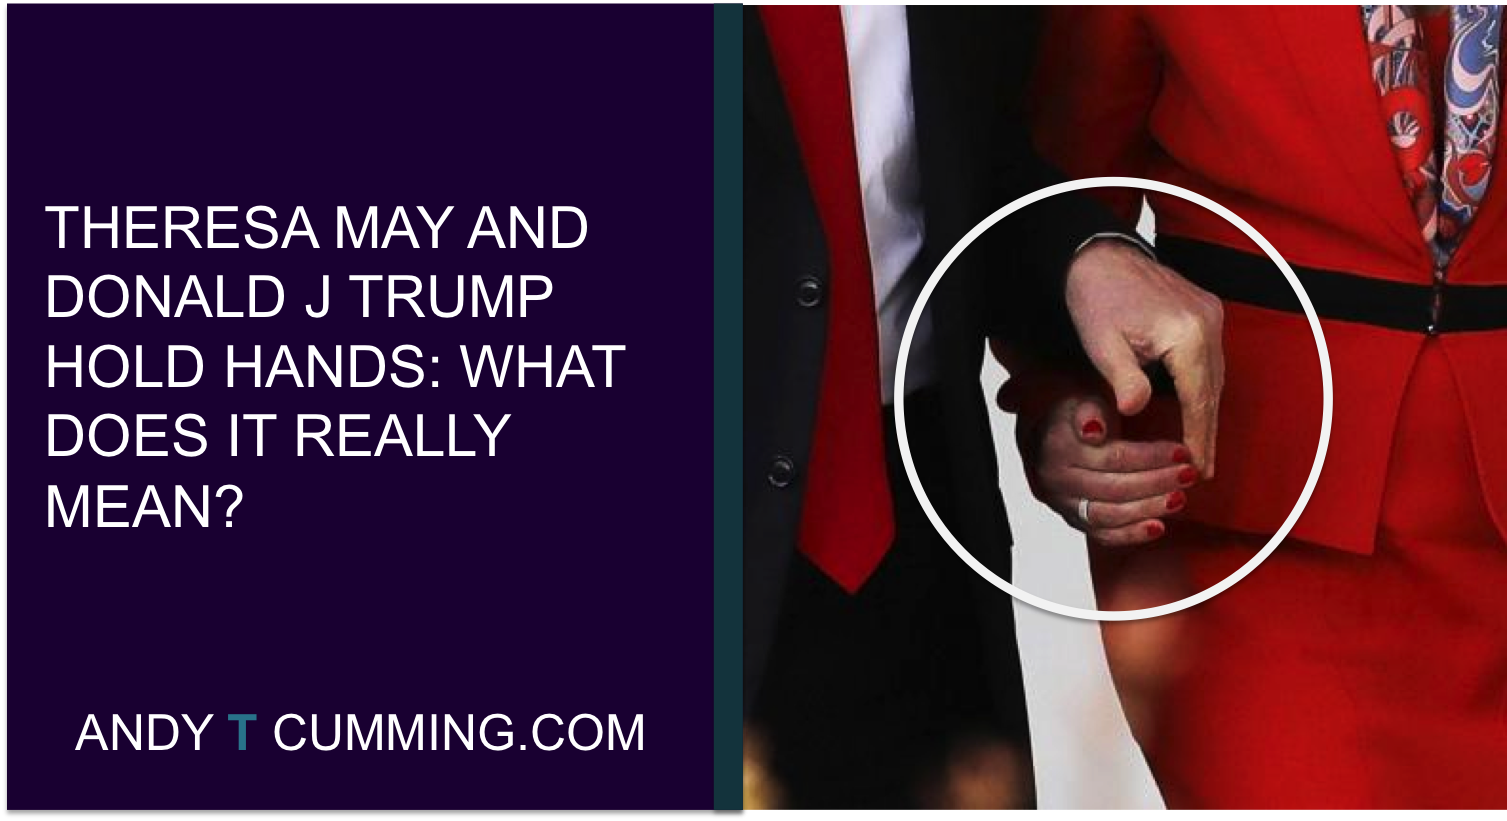 Teresa May and Donald J Trump Hold Hands; What Does It Really Mean?